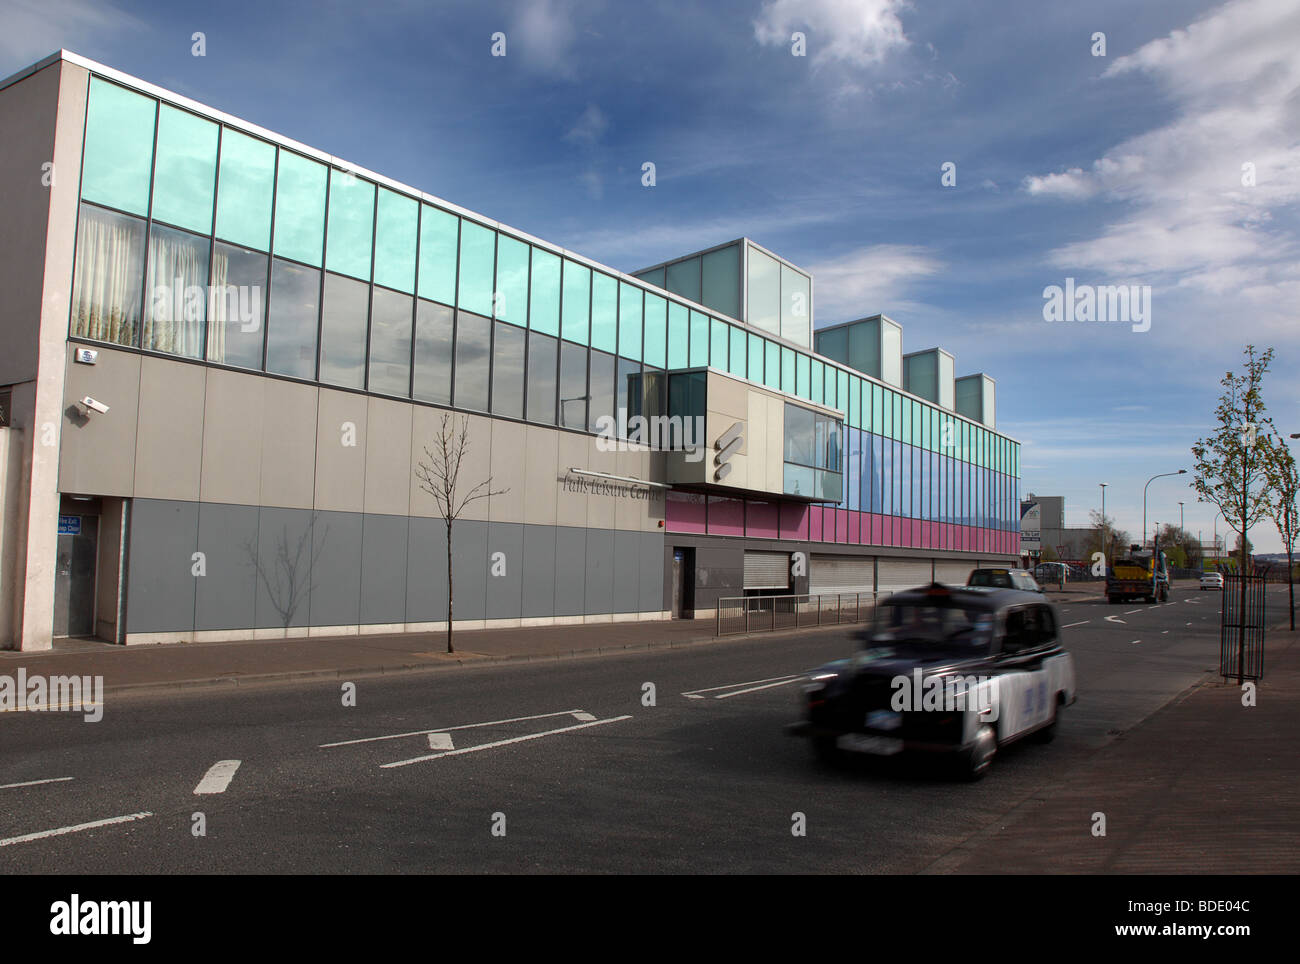 IRELAND, North, Belfast, West, Falls Road, Exterior of the refurbished Falls Swimming Baths with black taxi cab passing by. Stock Photo